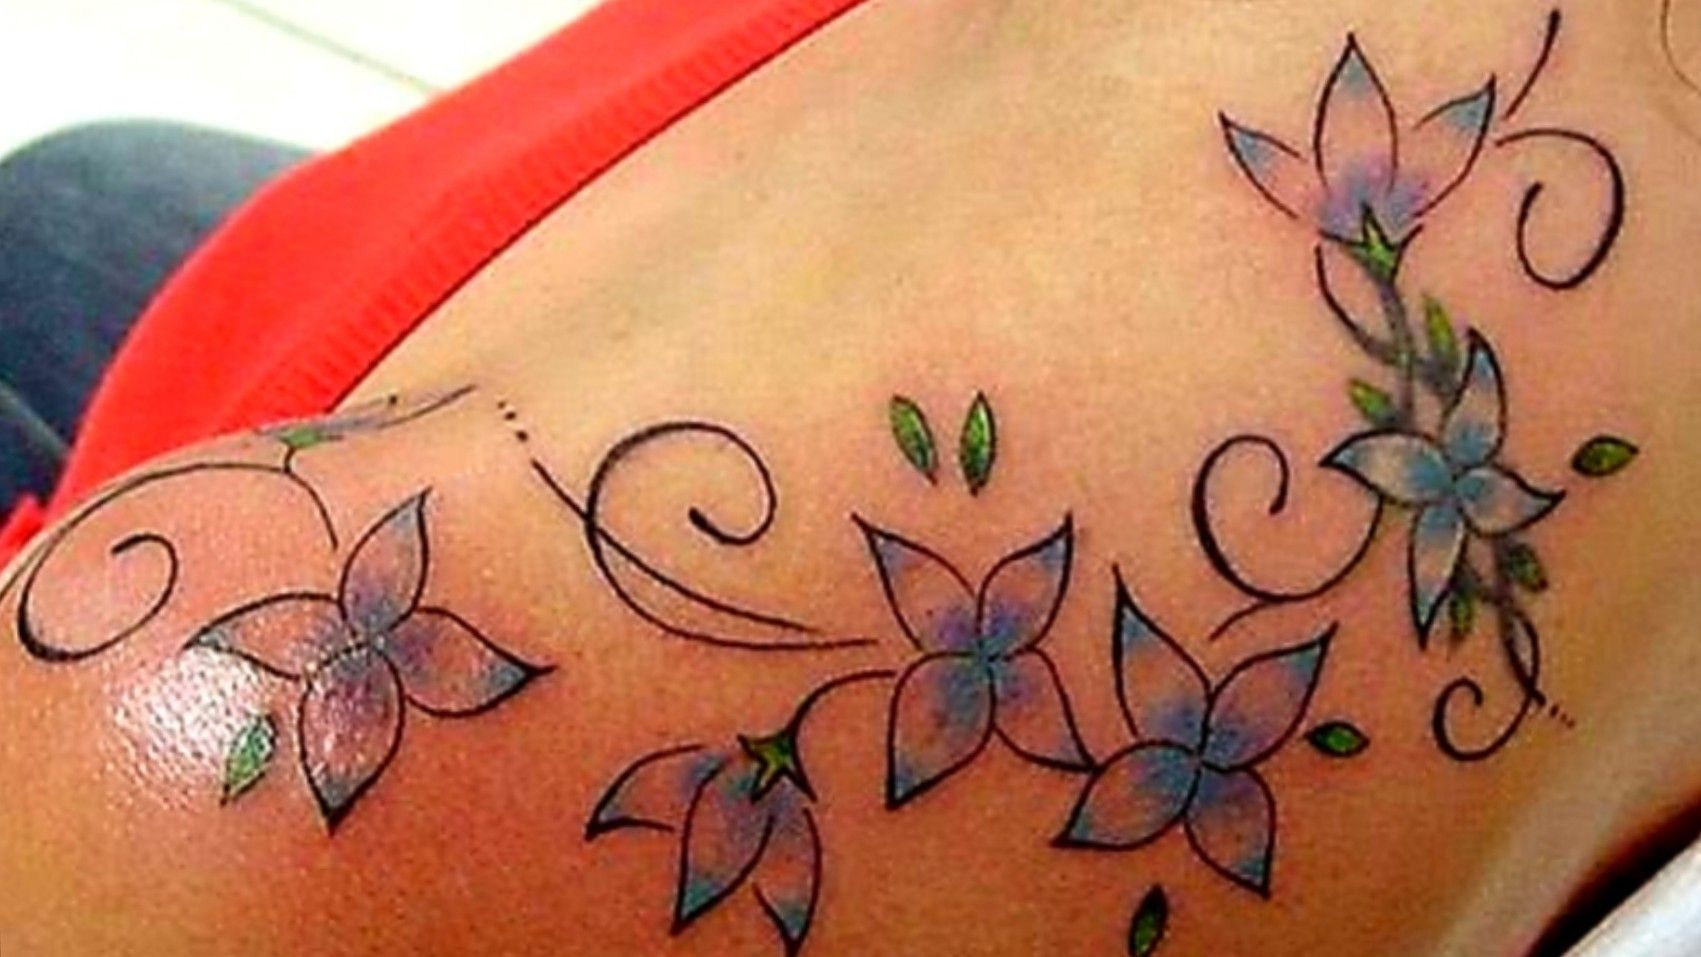 flowers and vines tattoo